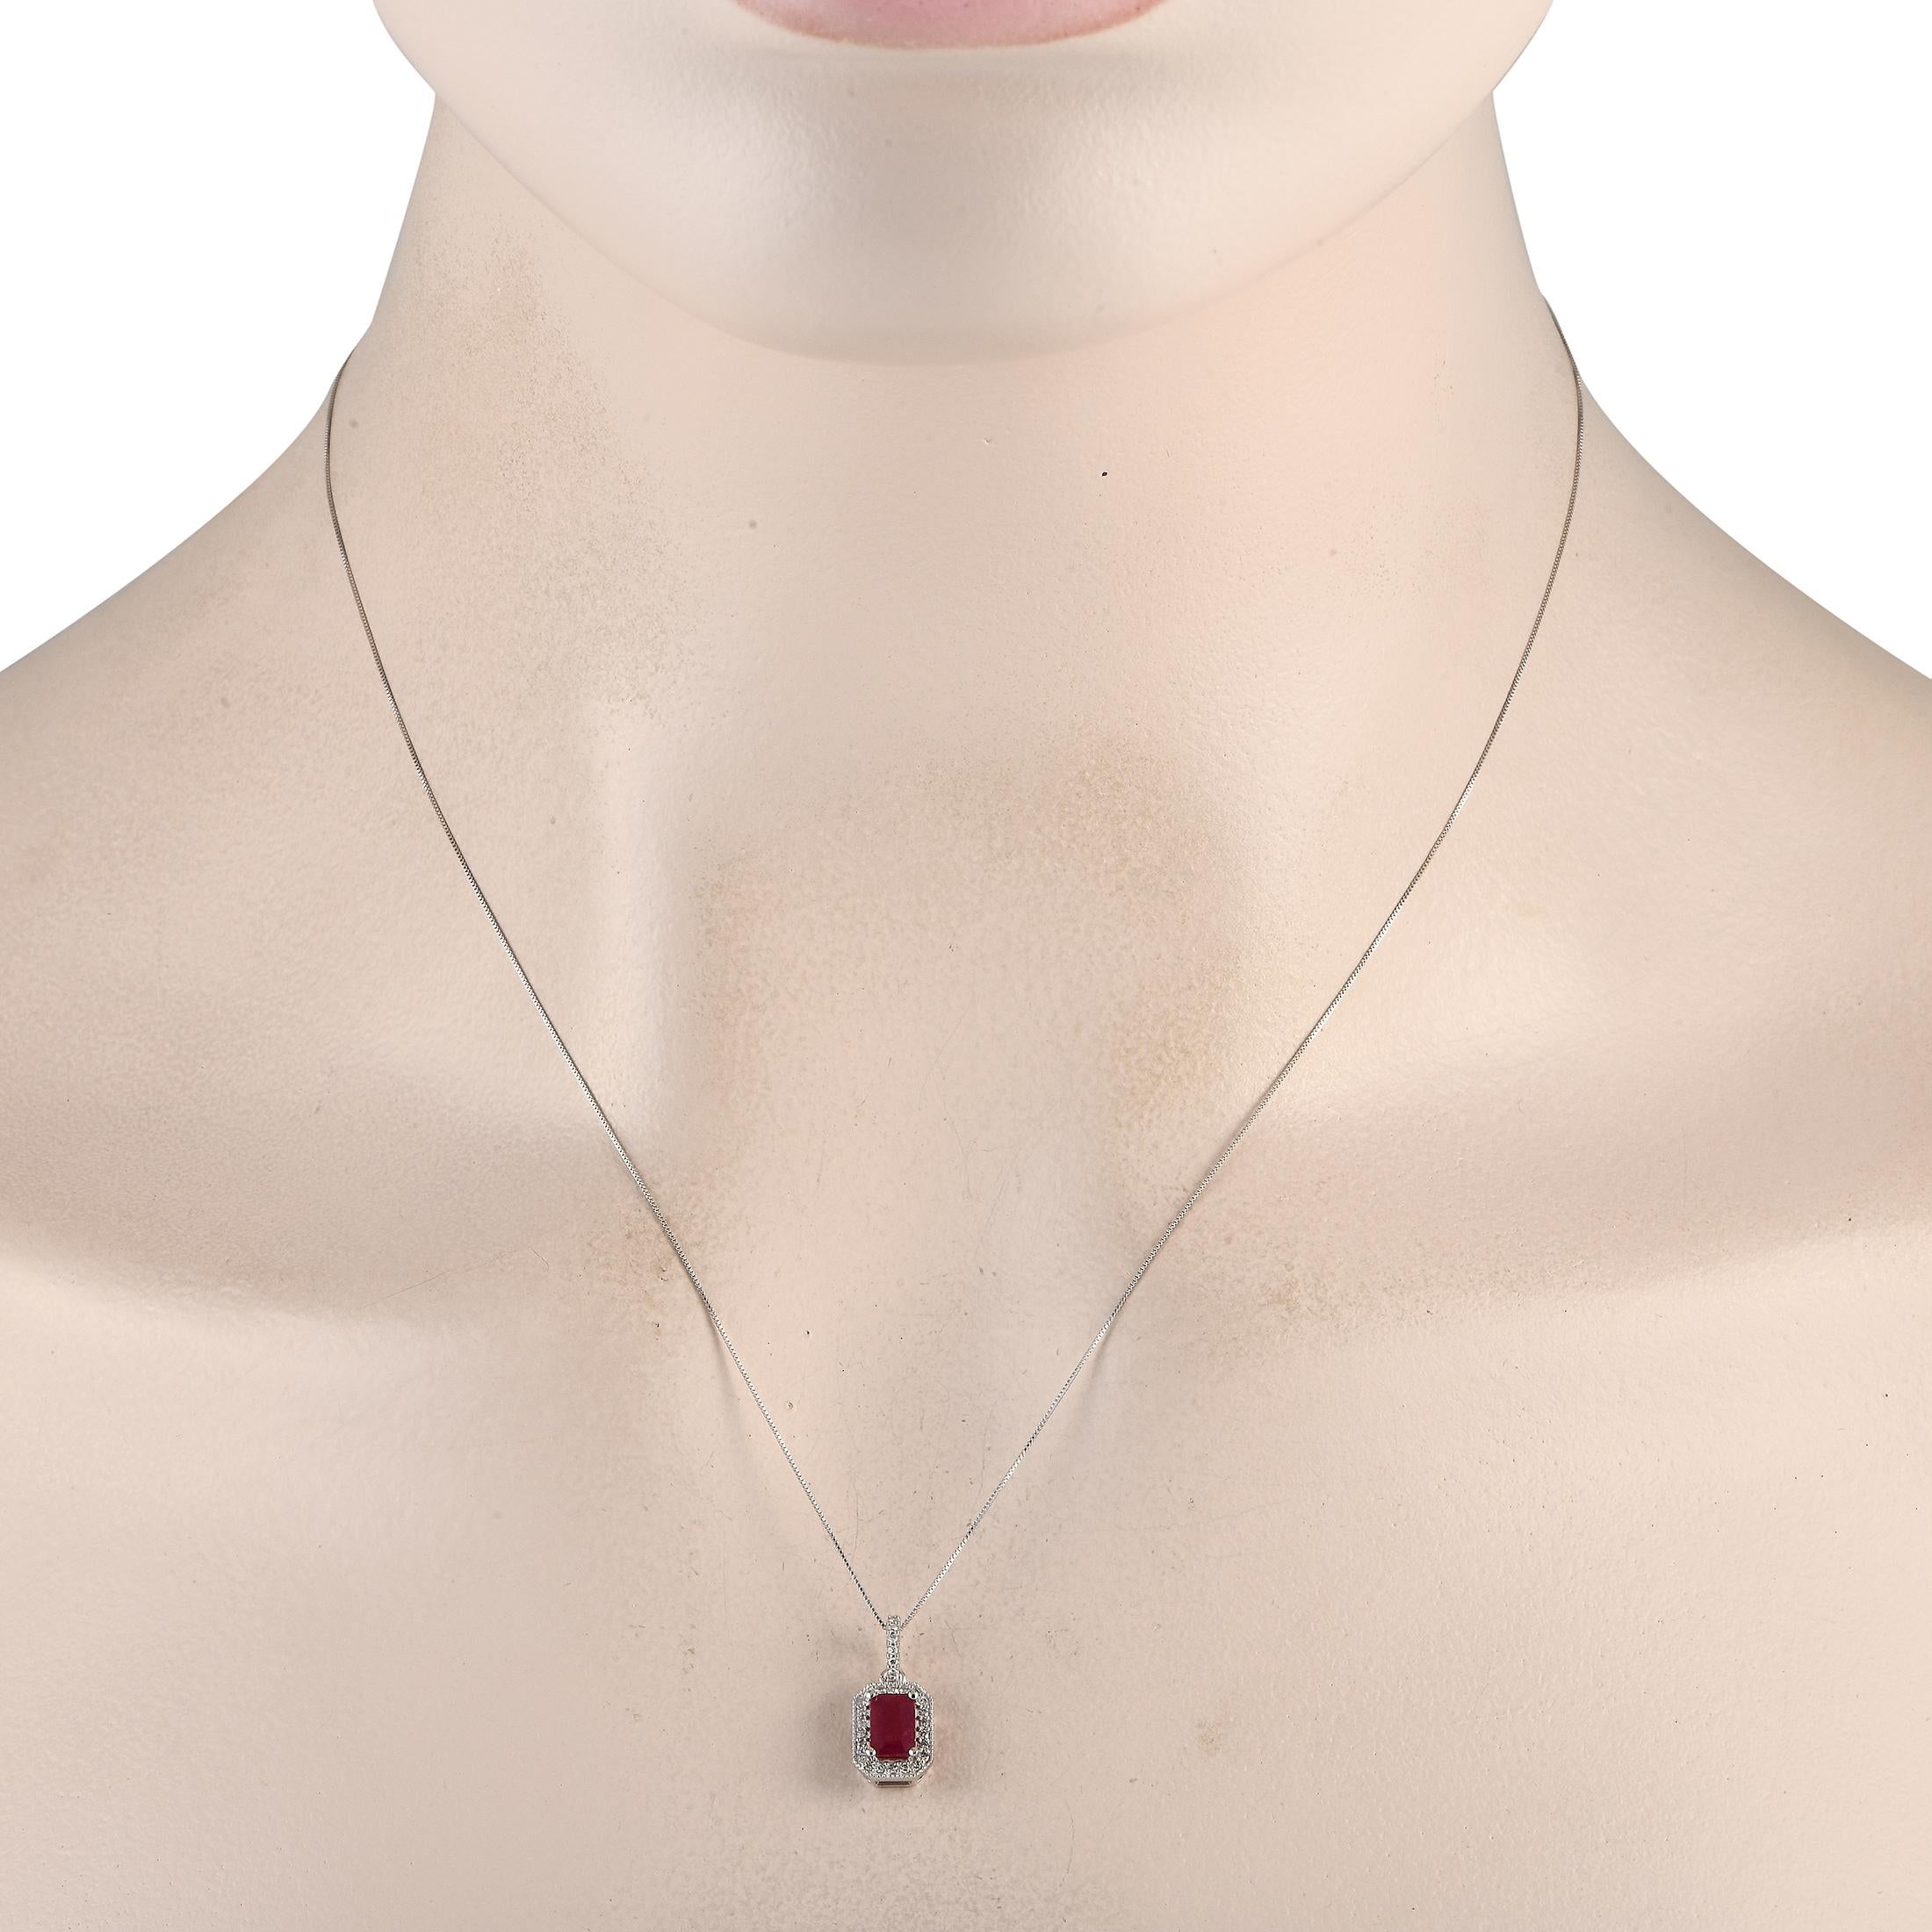 A ruby center stone serves as a striking focal point on this impeccably crafted necklace. Simple and elegant, this piece features a 14K white gold pendant measuring 0.65 long by 0.25 wide suspended from an 18 chain. Diamonds with a total weight of